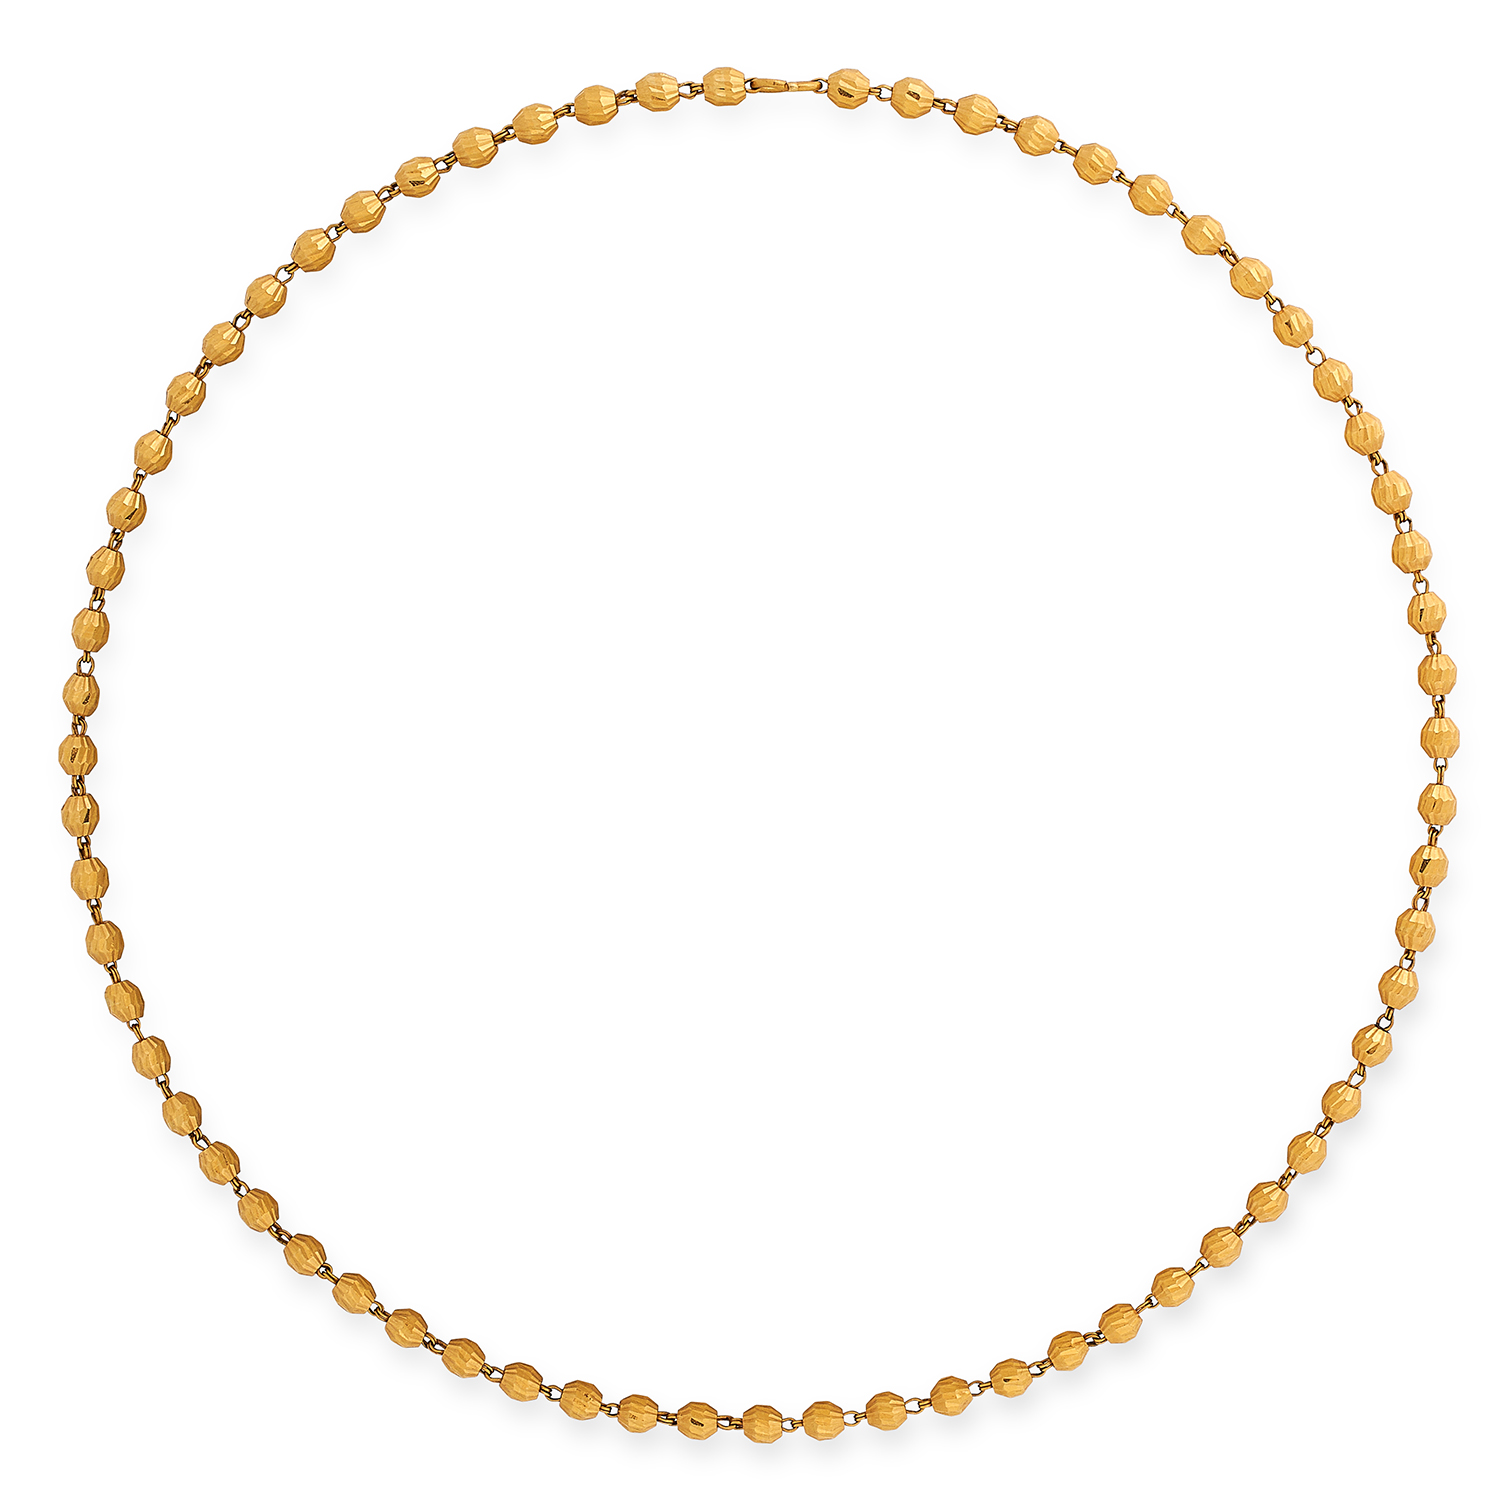 GOLD BEAD NECKLACE comprising of a single row of textured gold beads, 50cm, 20.5g.